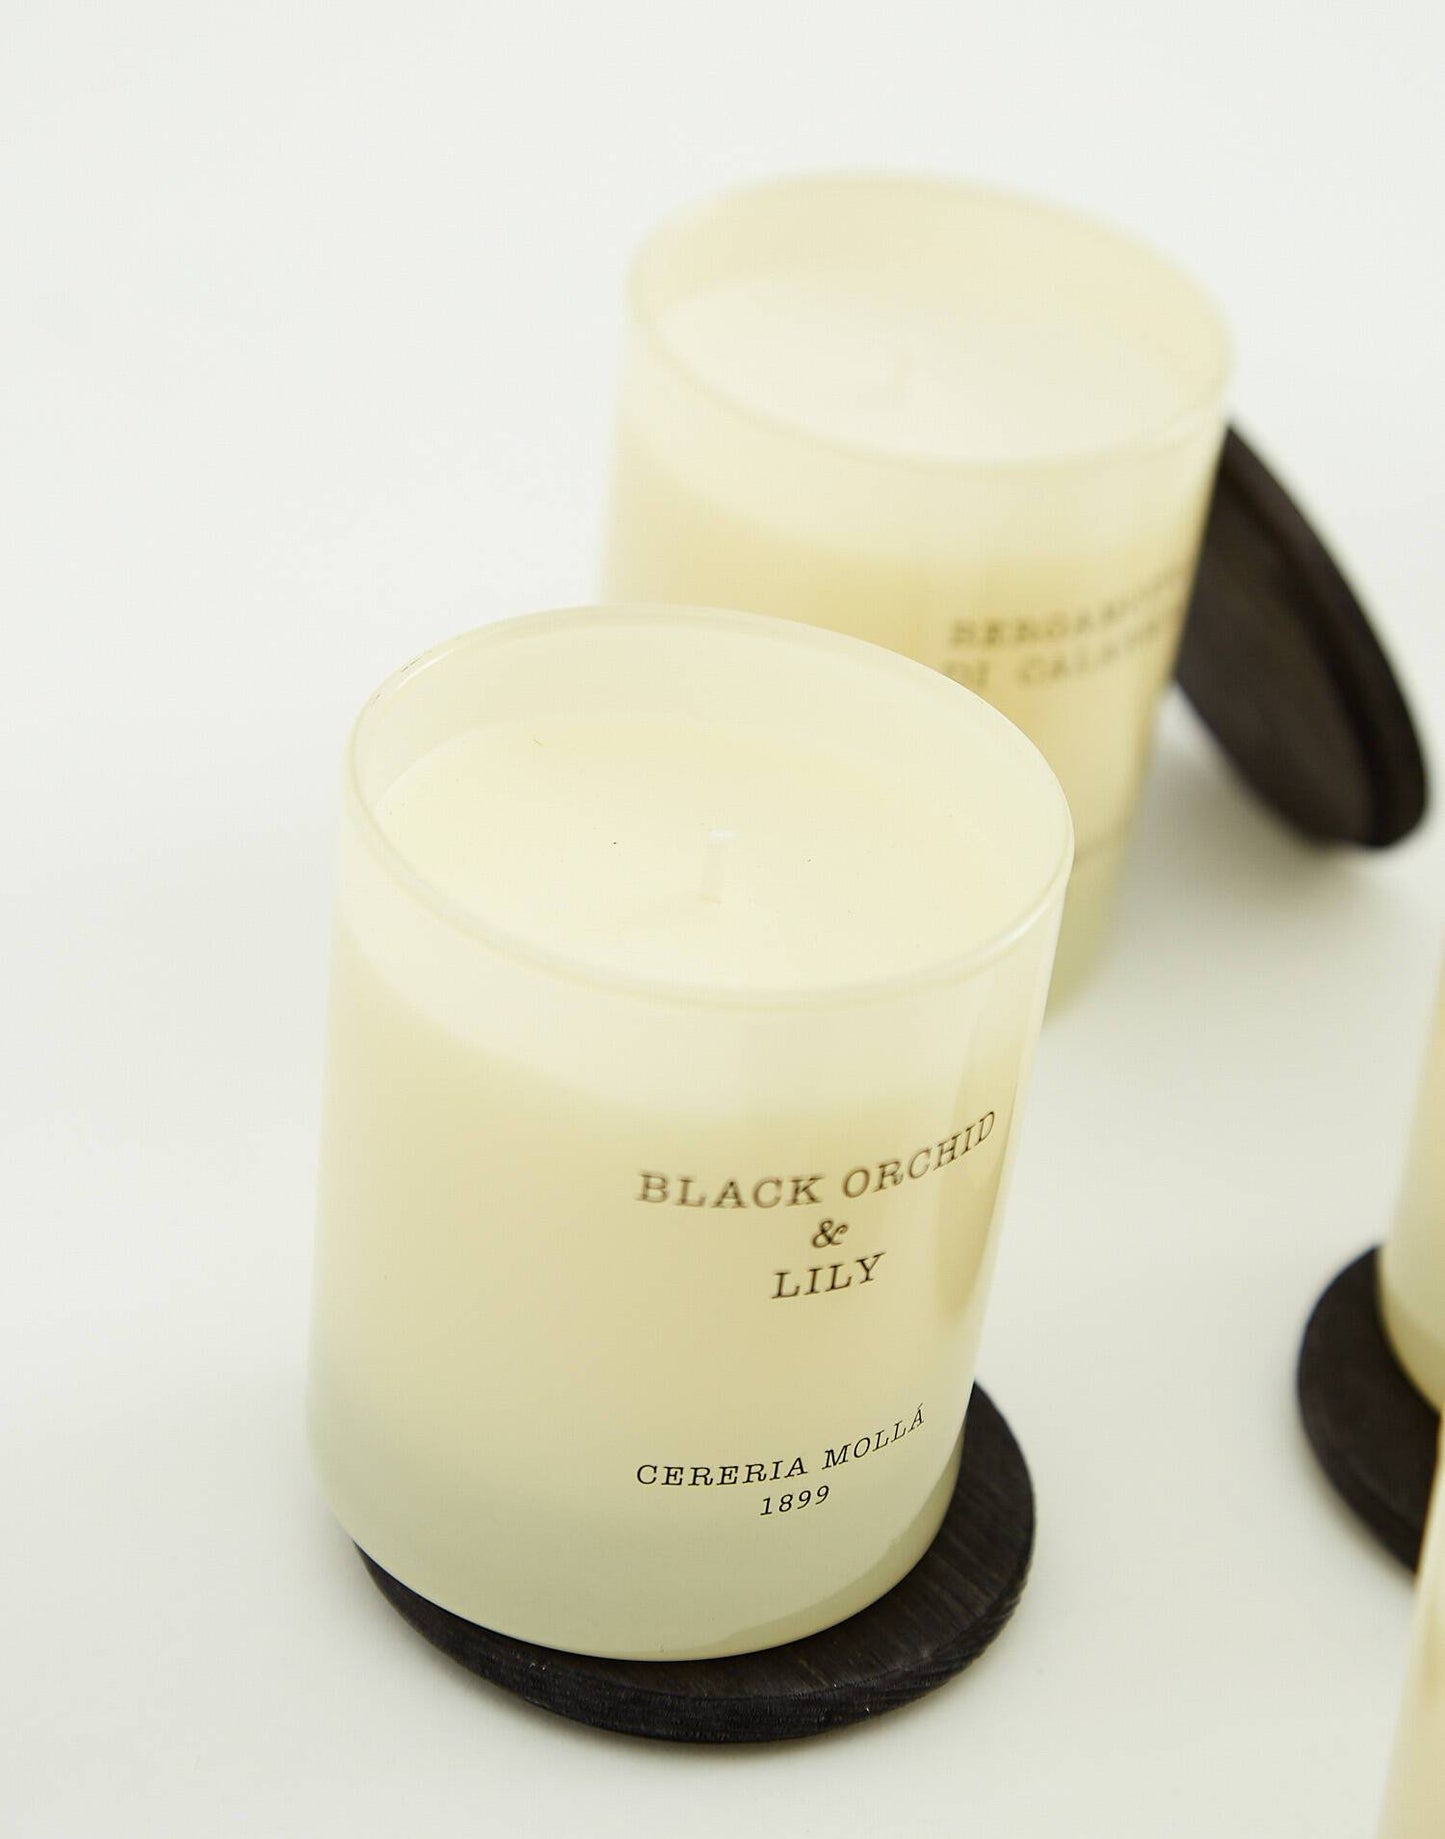 Premium vessel candle with mollá cereing